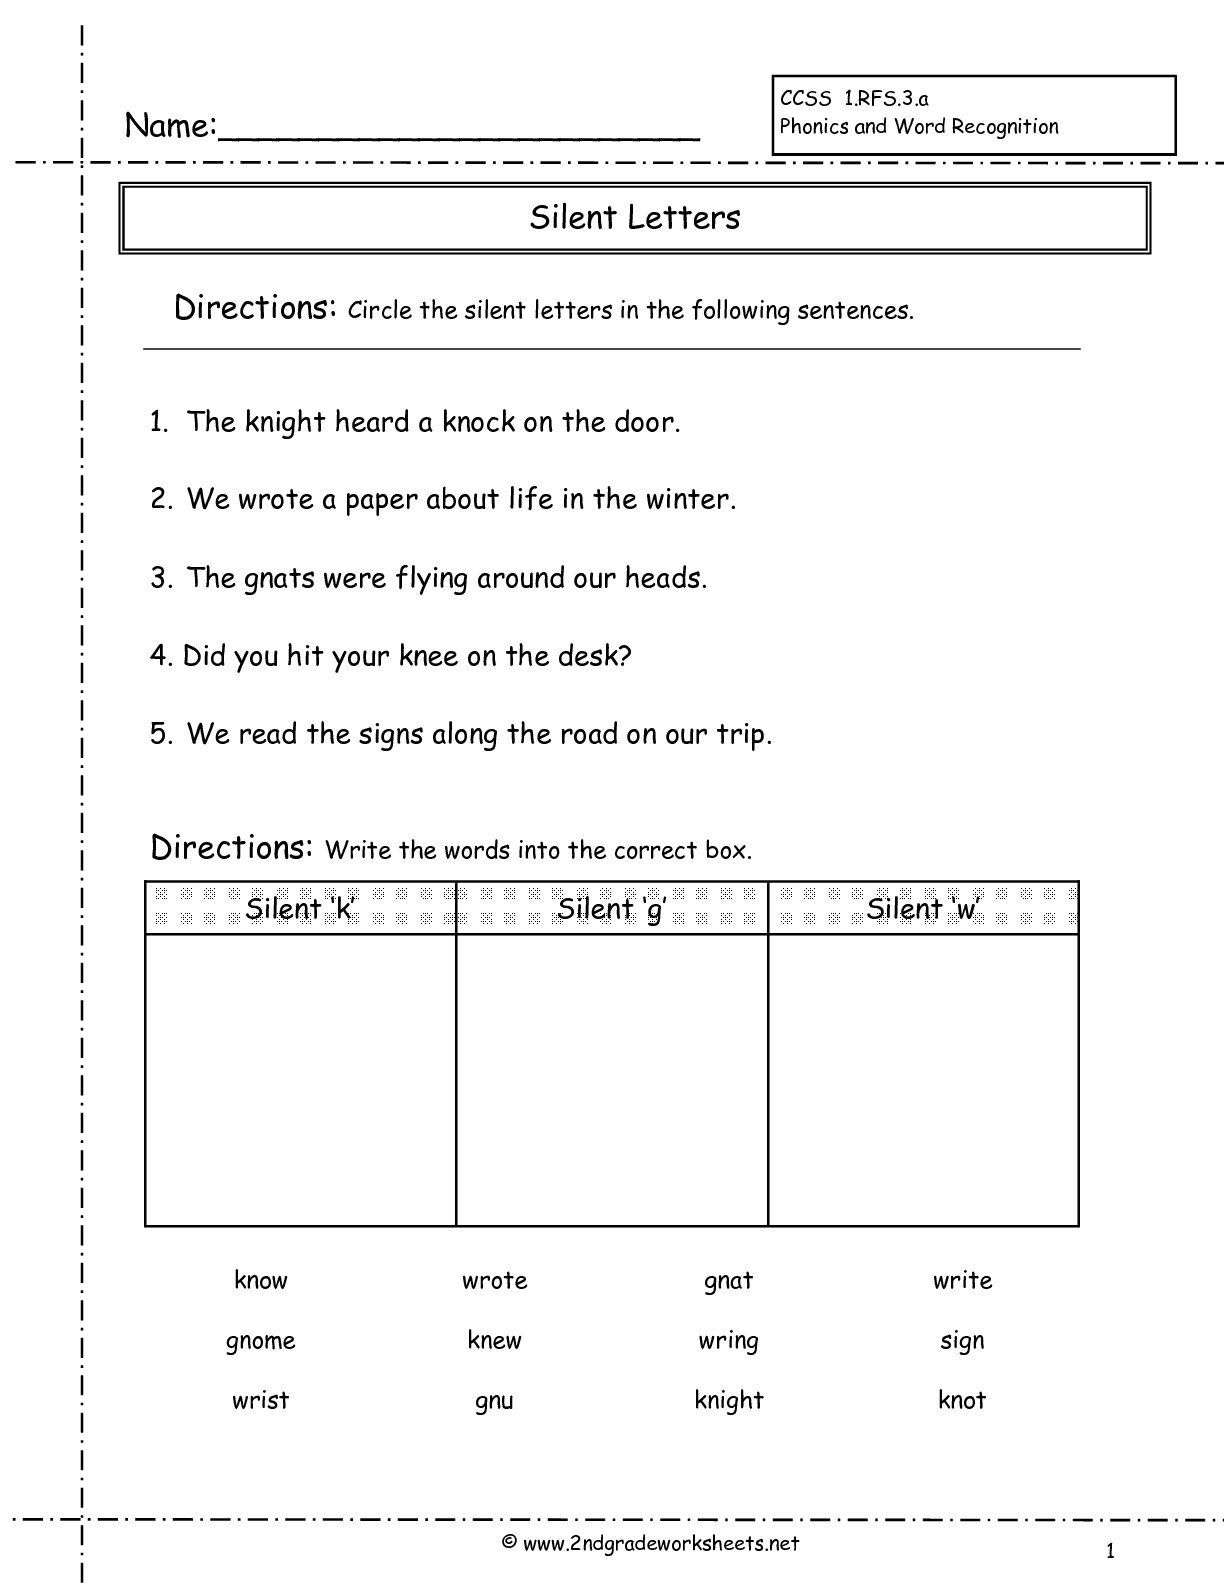 Second Grade Phonics Worksheets And Flashcards Intended For Phonics Worksheets Grade 2